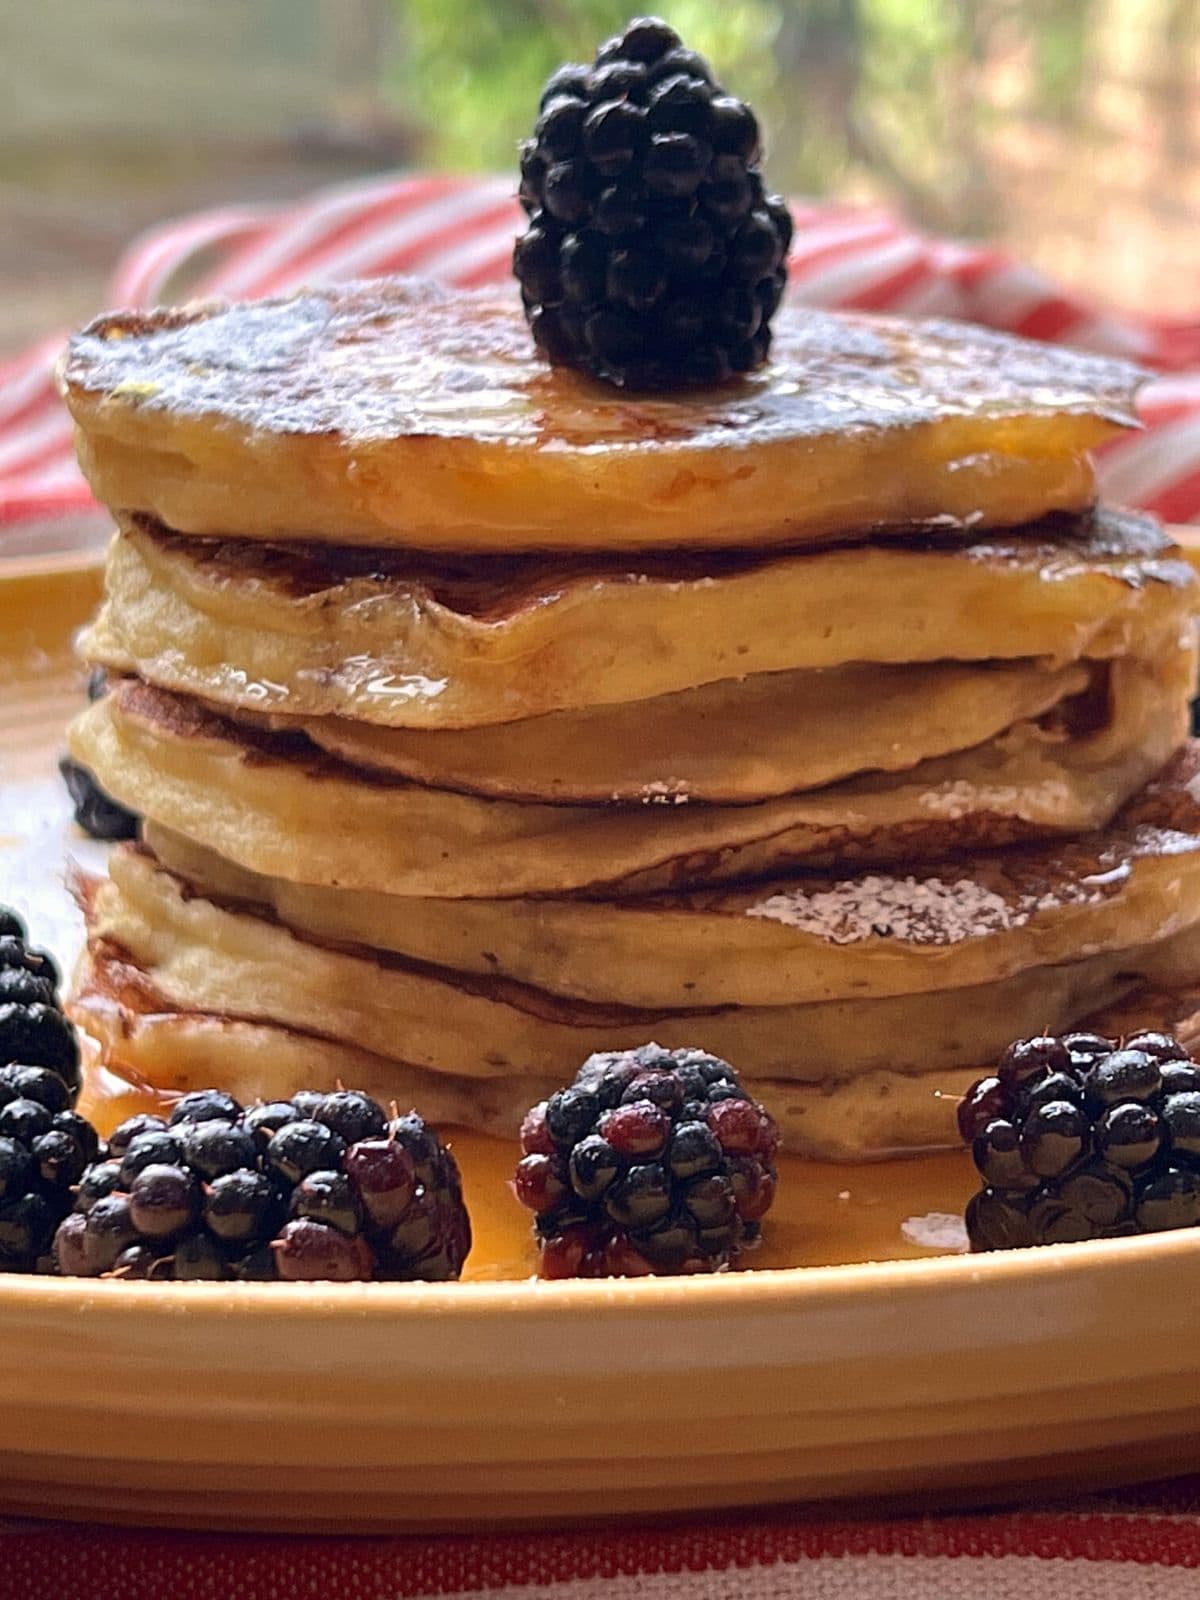 Stacked pancakes seen from side on yellow plate with blackberries.